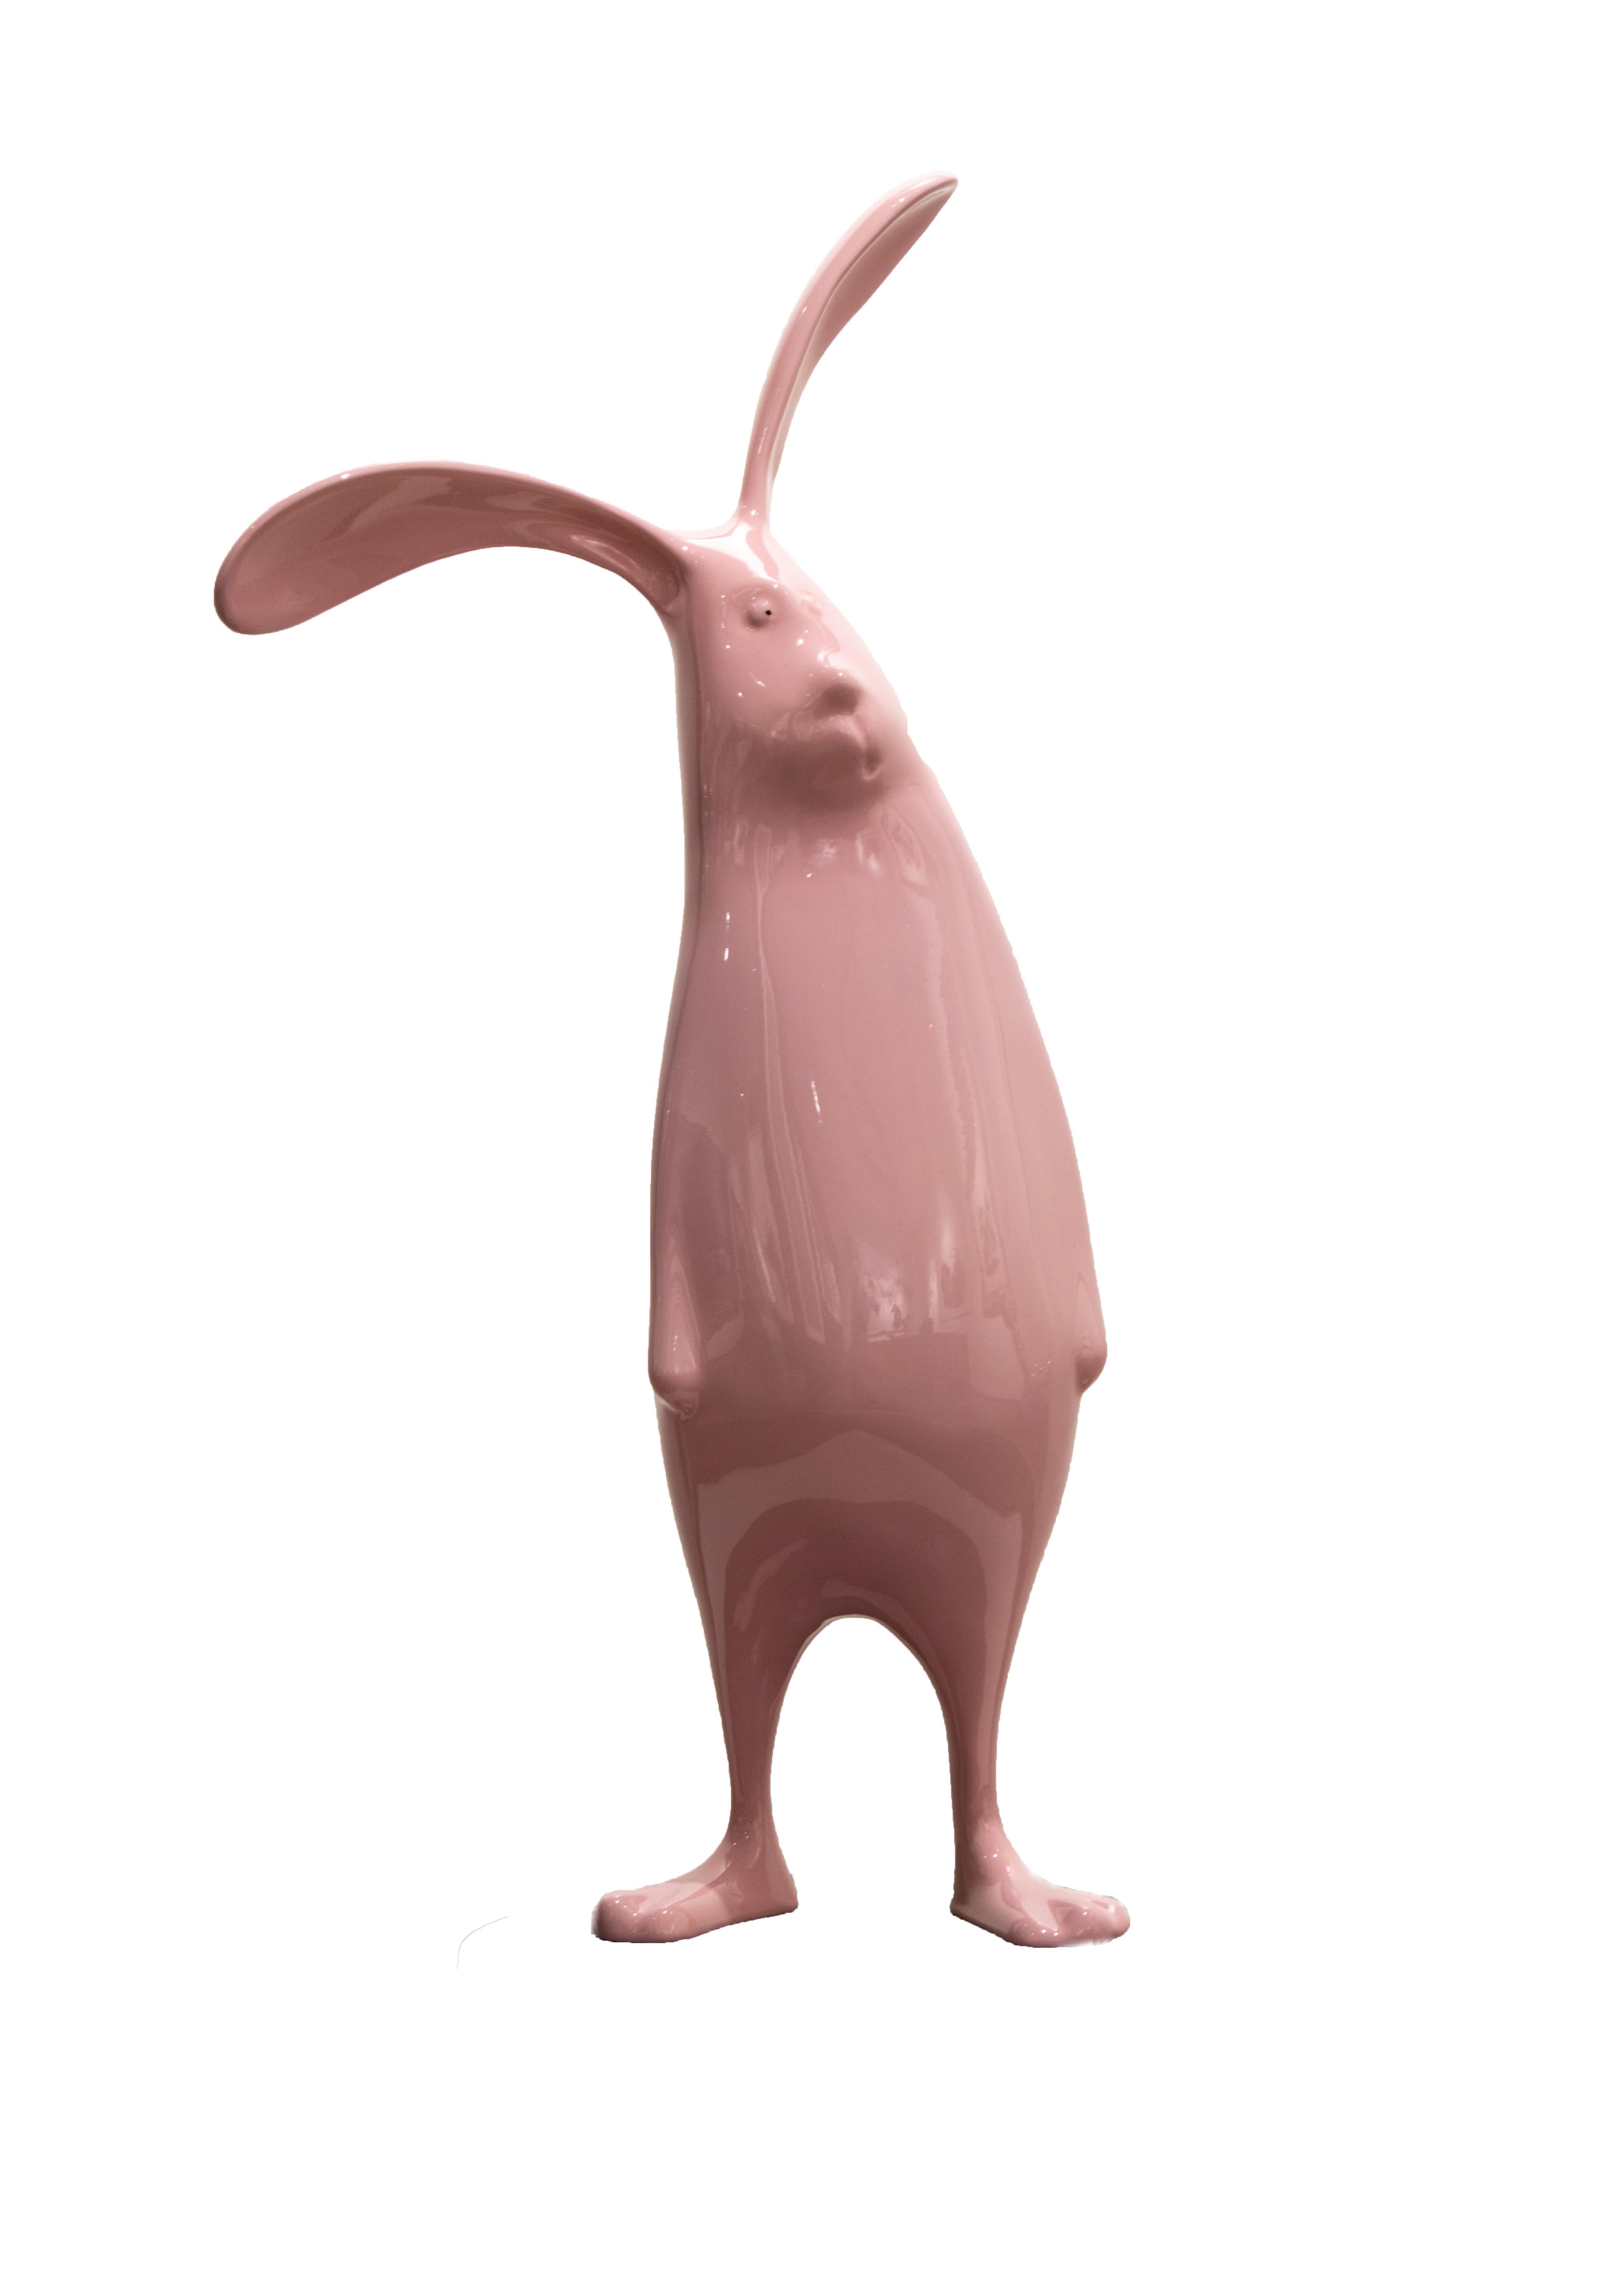 Zou Liang Figurative Sculpture - Rabbit sculpture in pink. Temporarily sold out. Pre-order is available.